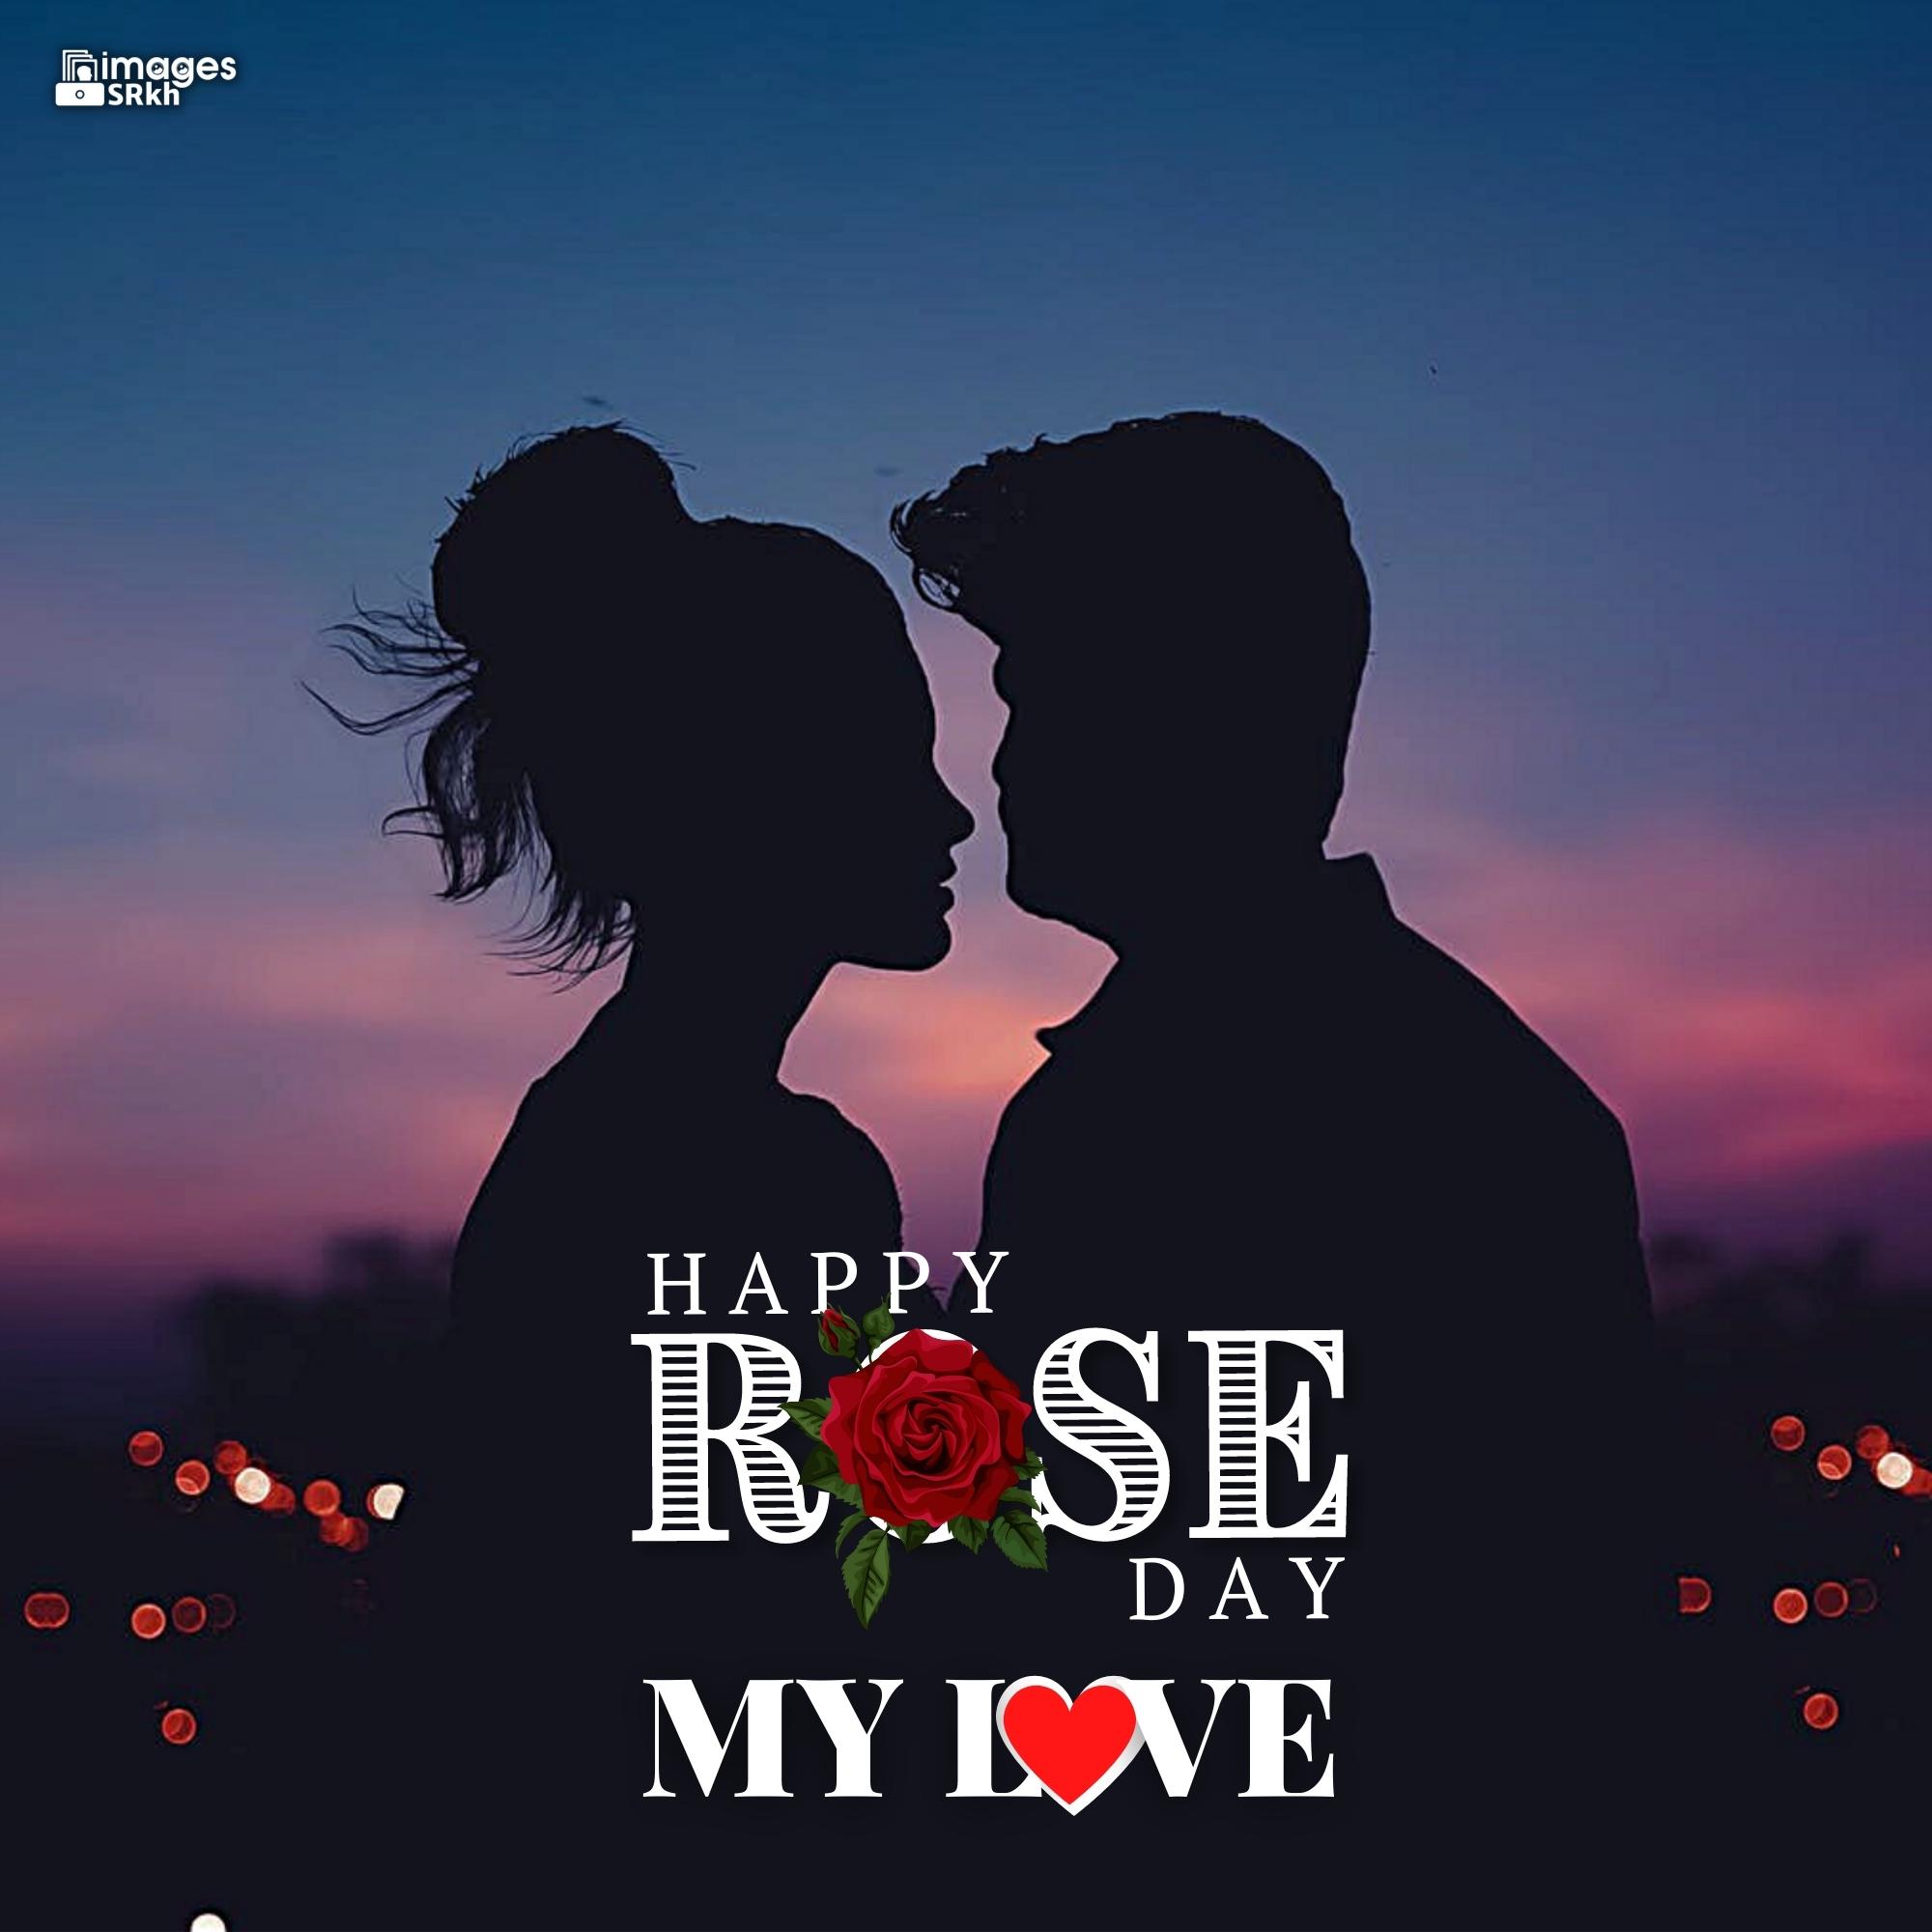 Happy Rose Day My Love (2) | HD IMAGES